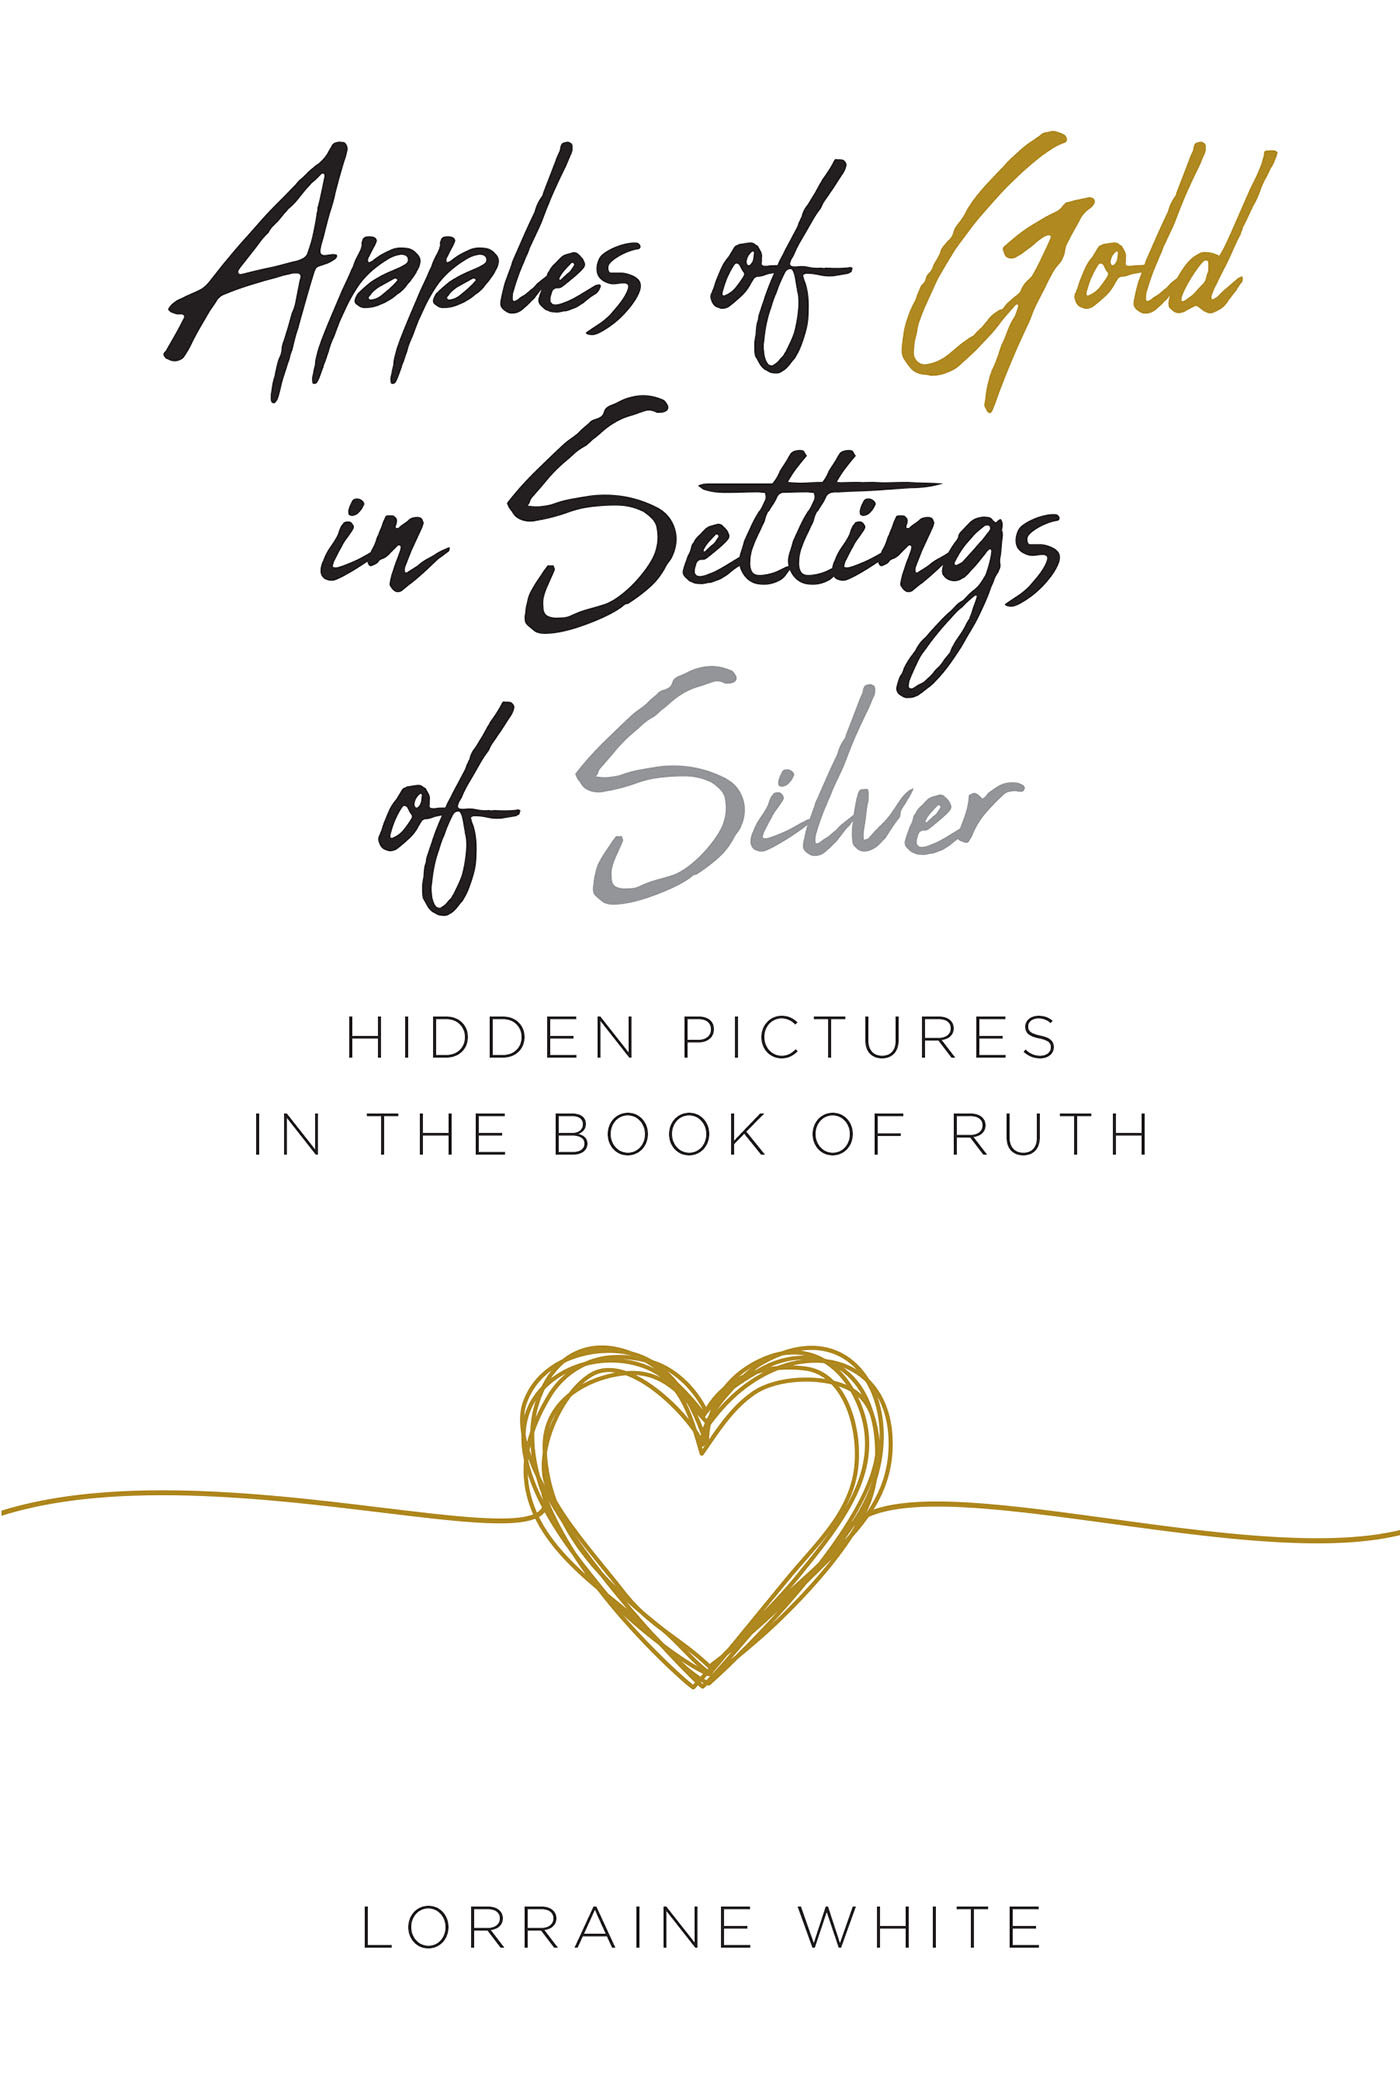 Lorraine White’s Newly Released “Apples of Gold in Settings of Silver: Hidden Pictures in the Book of Ruth” is an Informative Study of a Key Biblical Figure